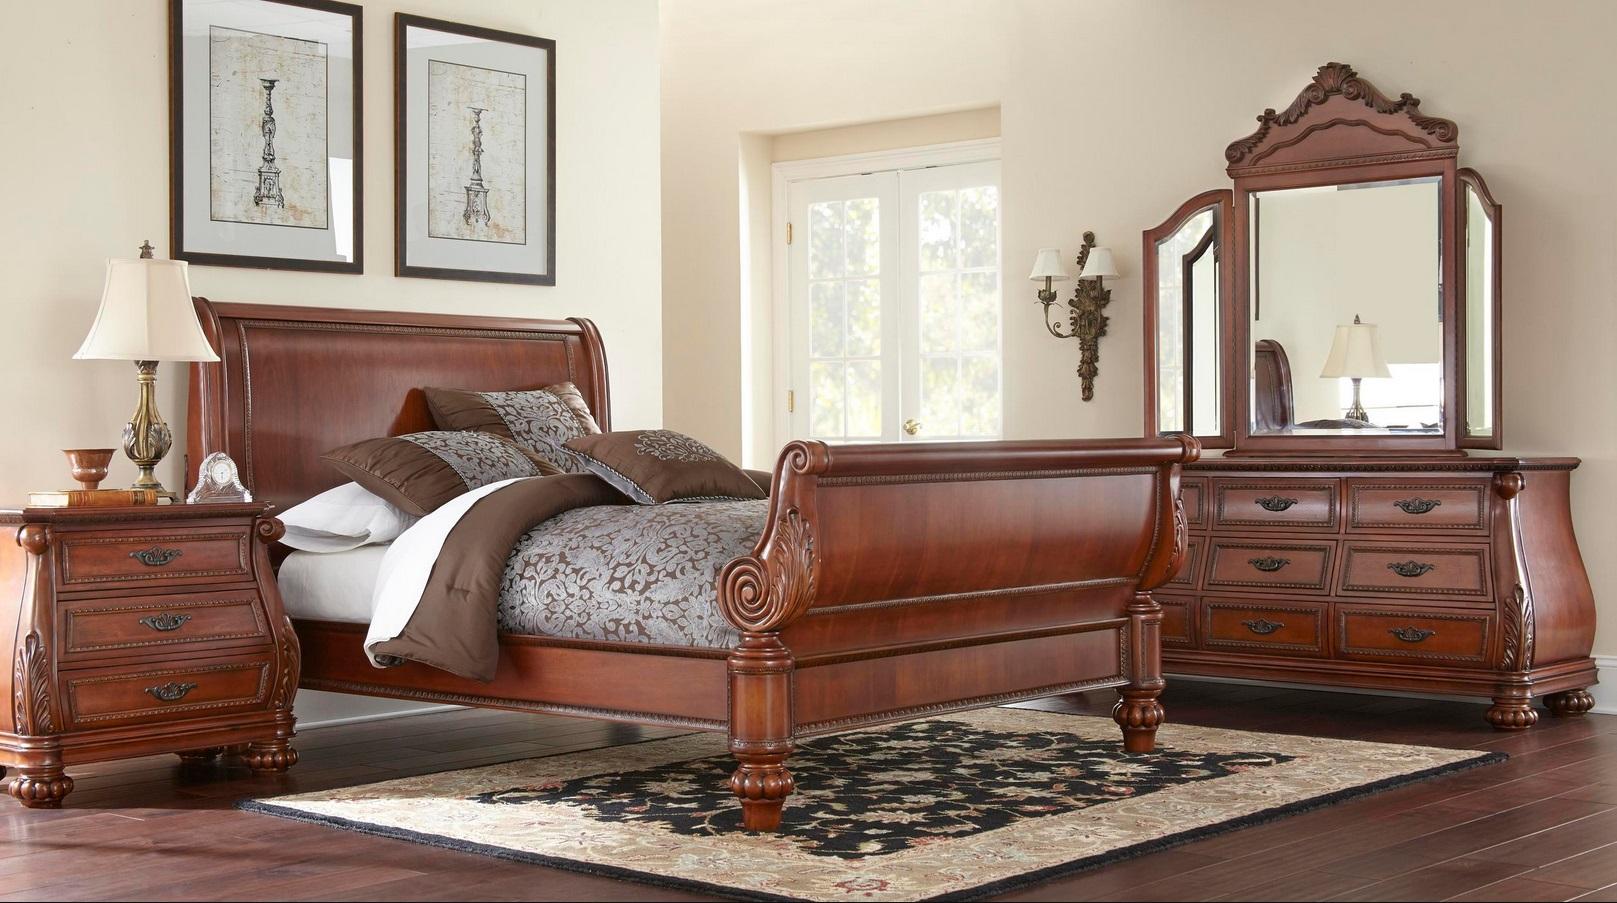 

    
Soflex Stevie Cherry Brown Wood Queen Sleigh Bedroom Set 4Pcs Classic Traditional
